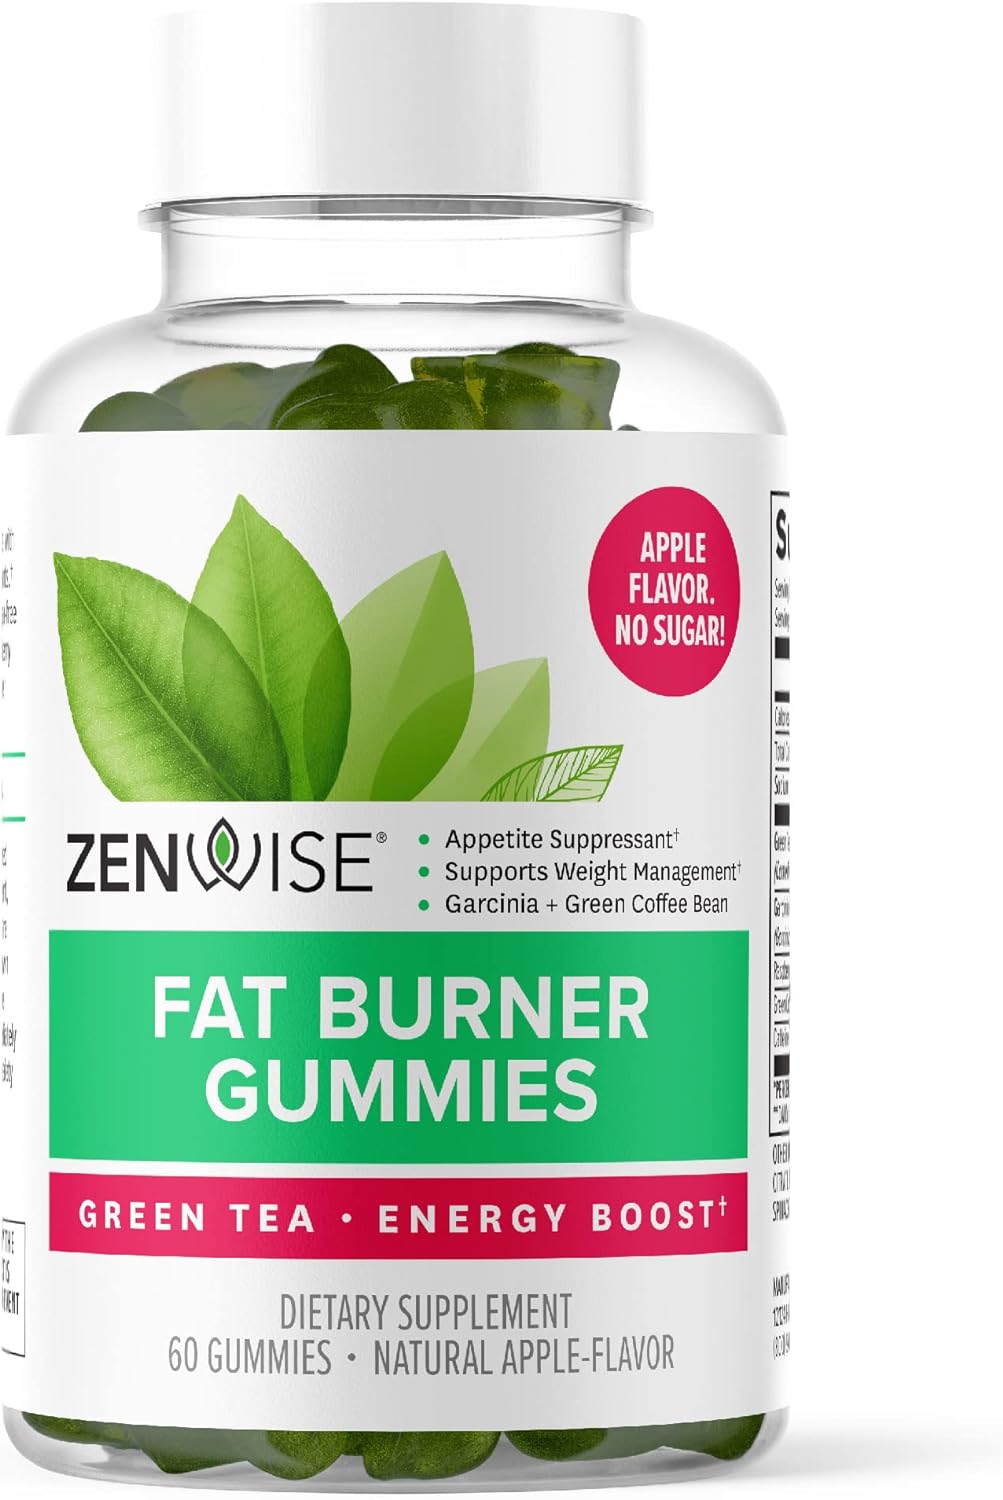 Zenwise Health Fat Burner Gummies - Appetite Suppressant for Weight Loss with Green Tea Extract and Garcinia Cambogia for Metabolism + Green Coffee Bean and Raspberry Ketone - 60 Count Apple Gummies